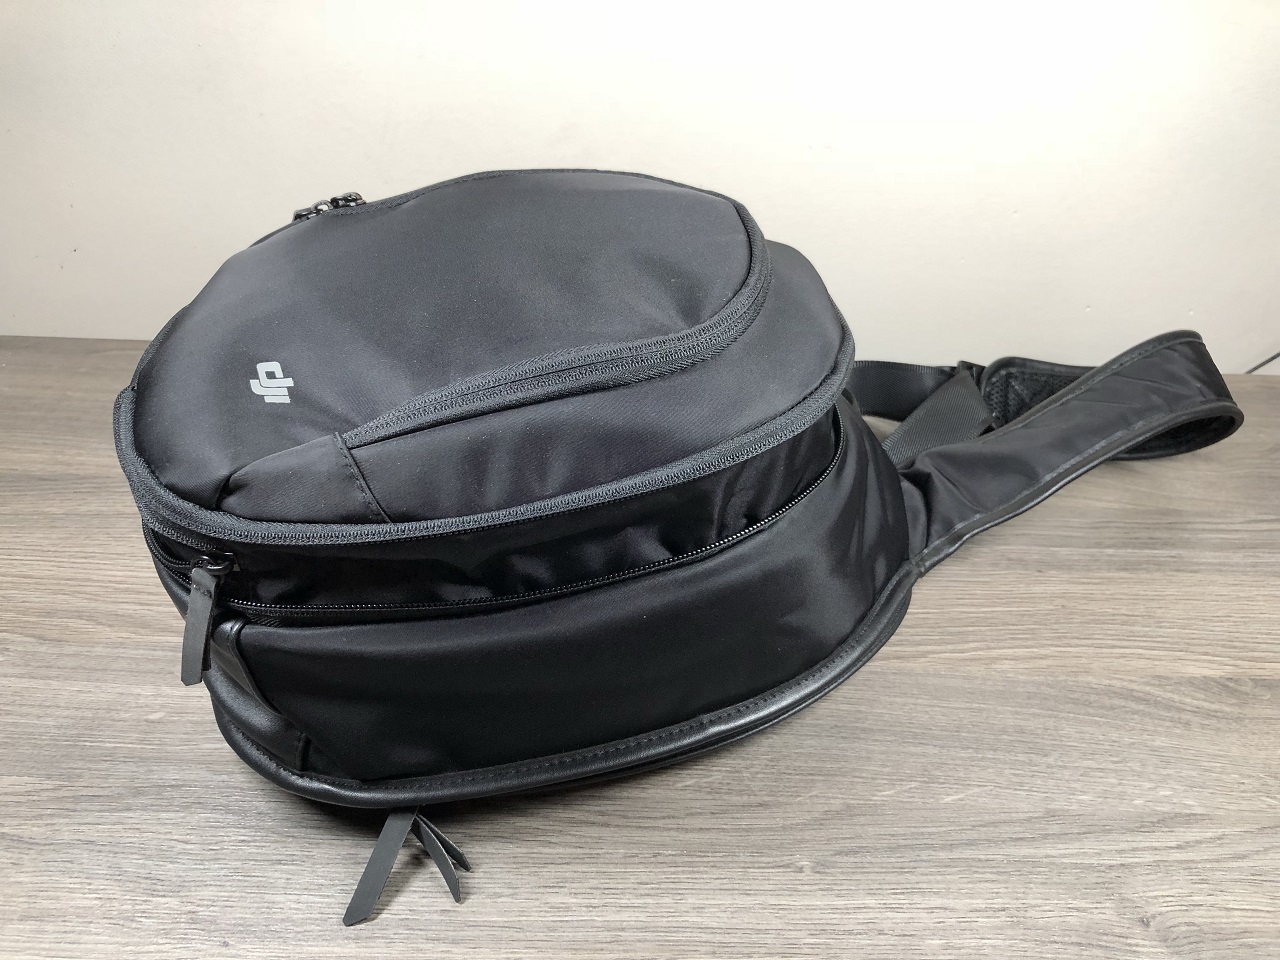 DJI Sling Bag Review | Best Case For The DJI Goggles – Air Photography